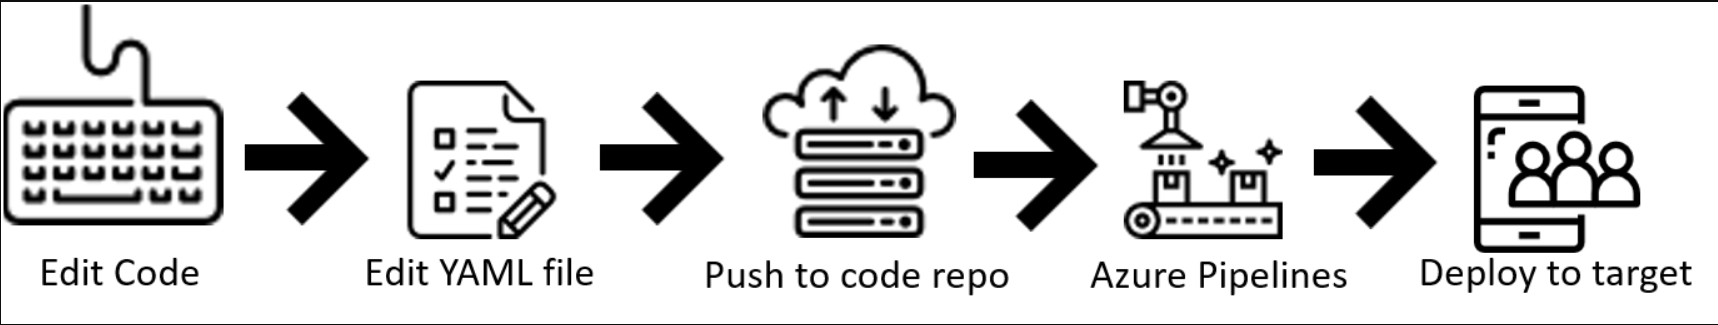 Flowchart with edit code, edit YAML file, push to code repo, Azure Pipelines, and deploy to target.